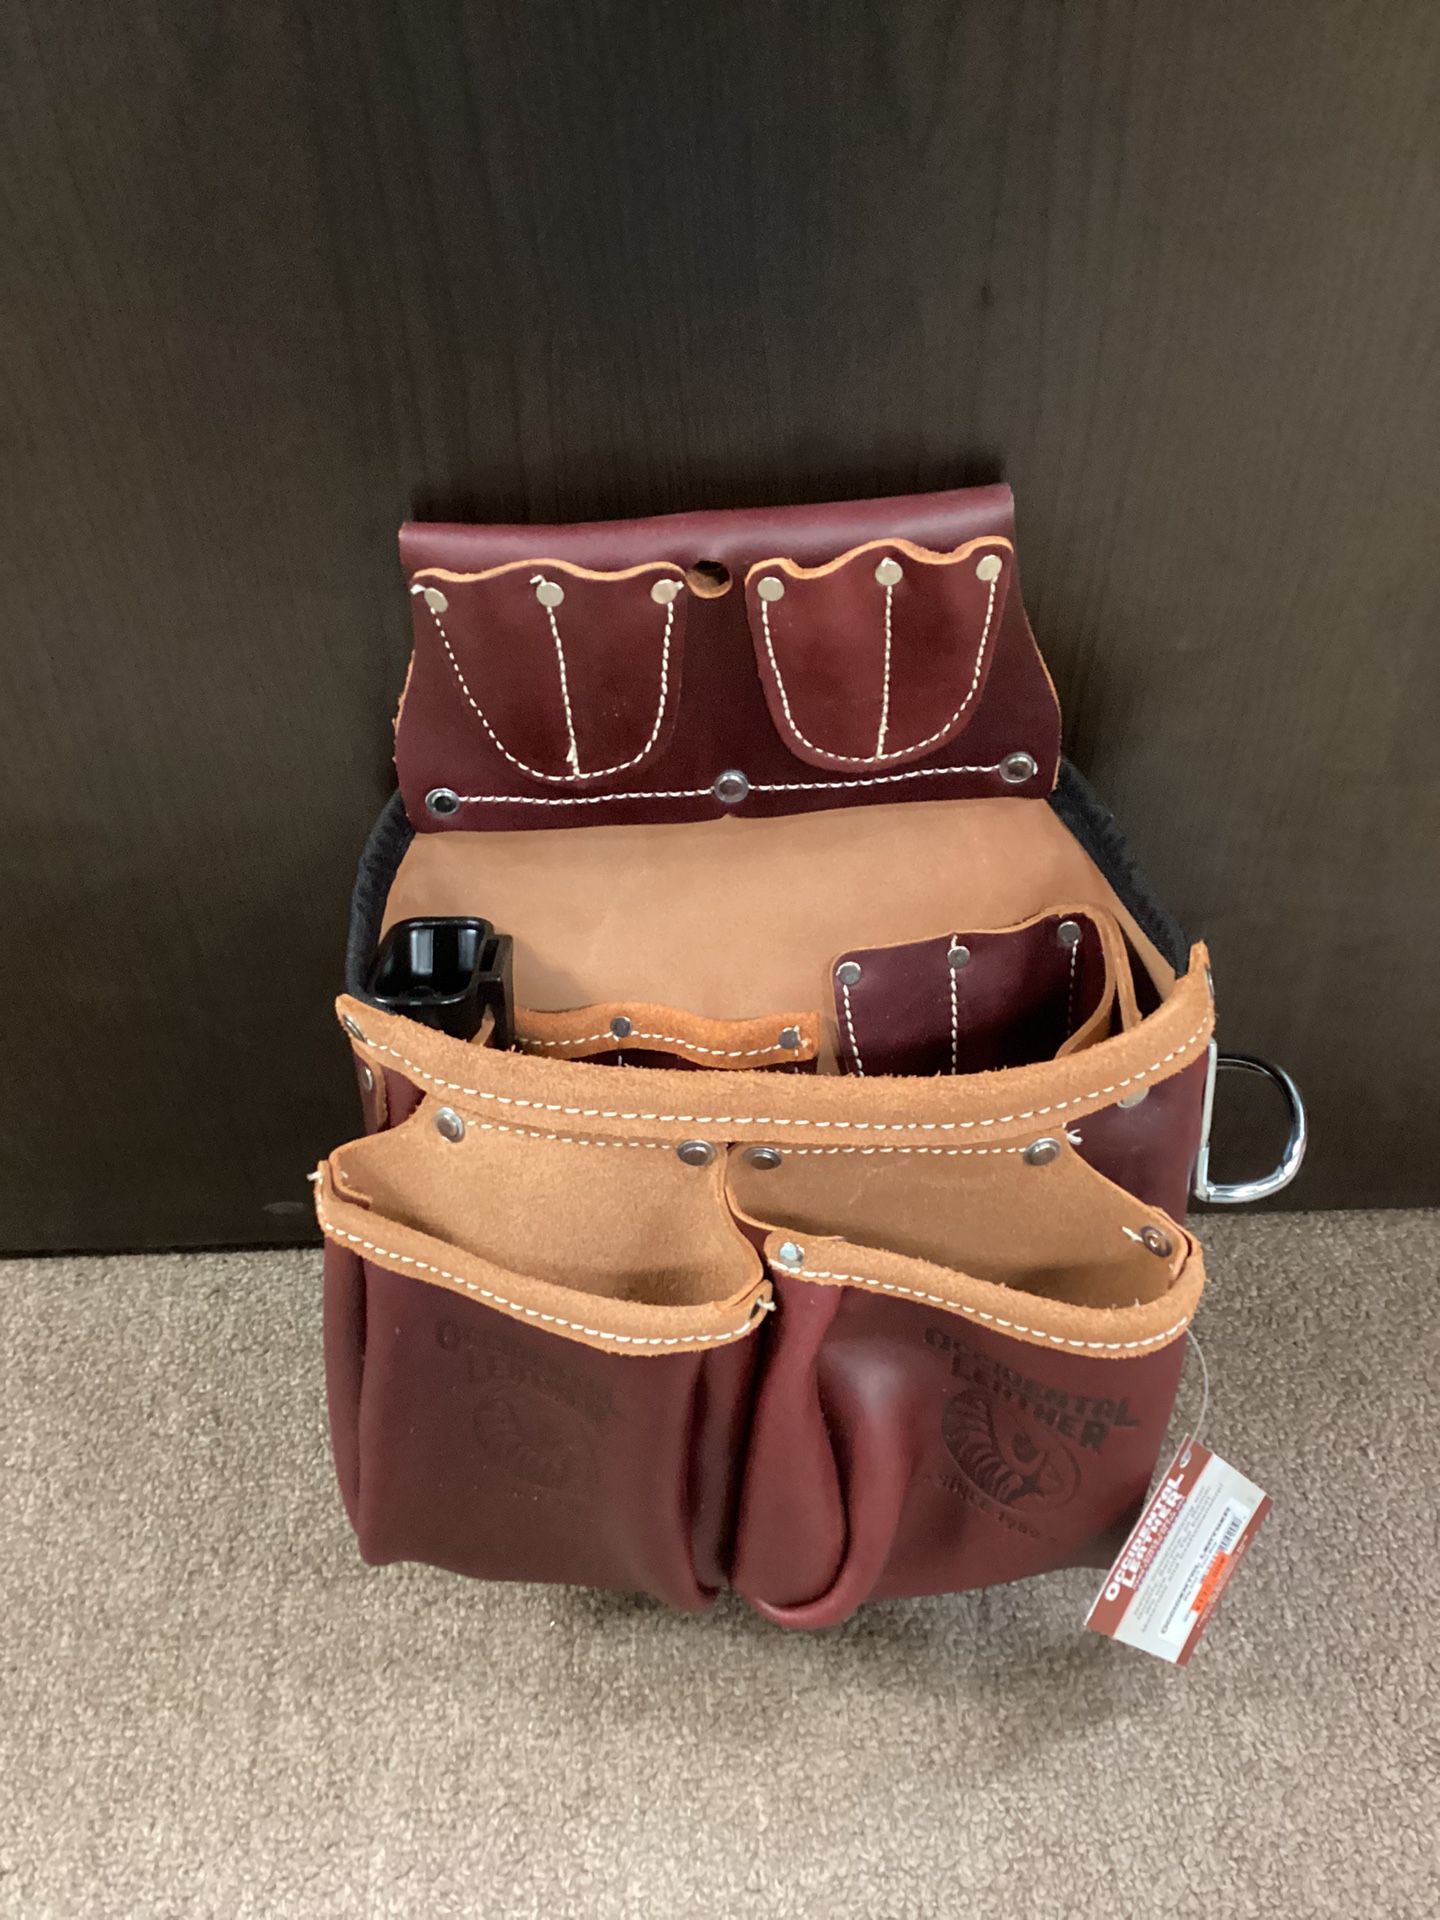 Occidental Leather 5526 Big Oxy Tool Bag for Sale in Hemet, CA OfferUp